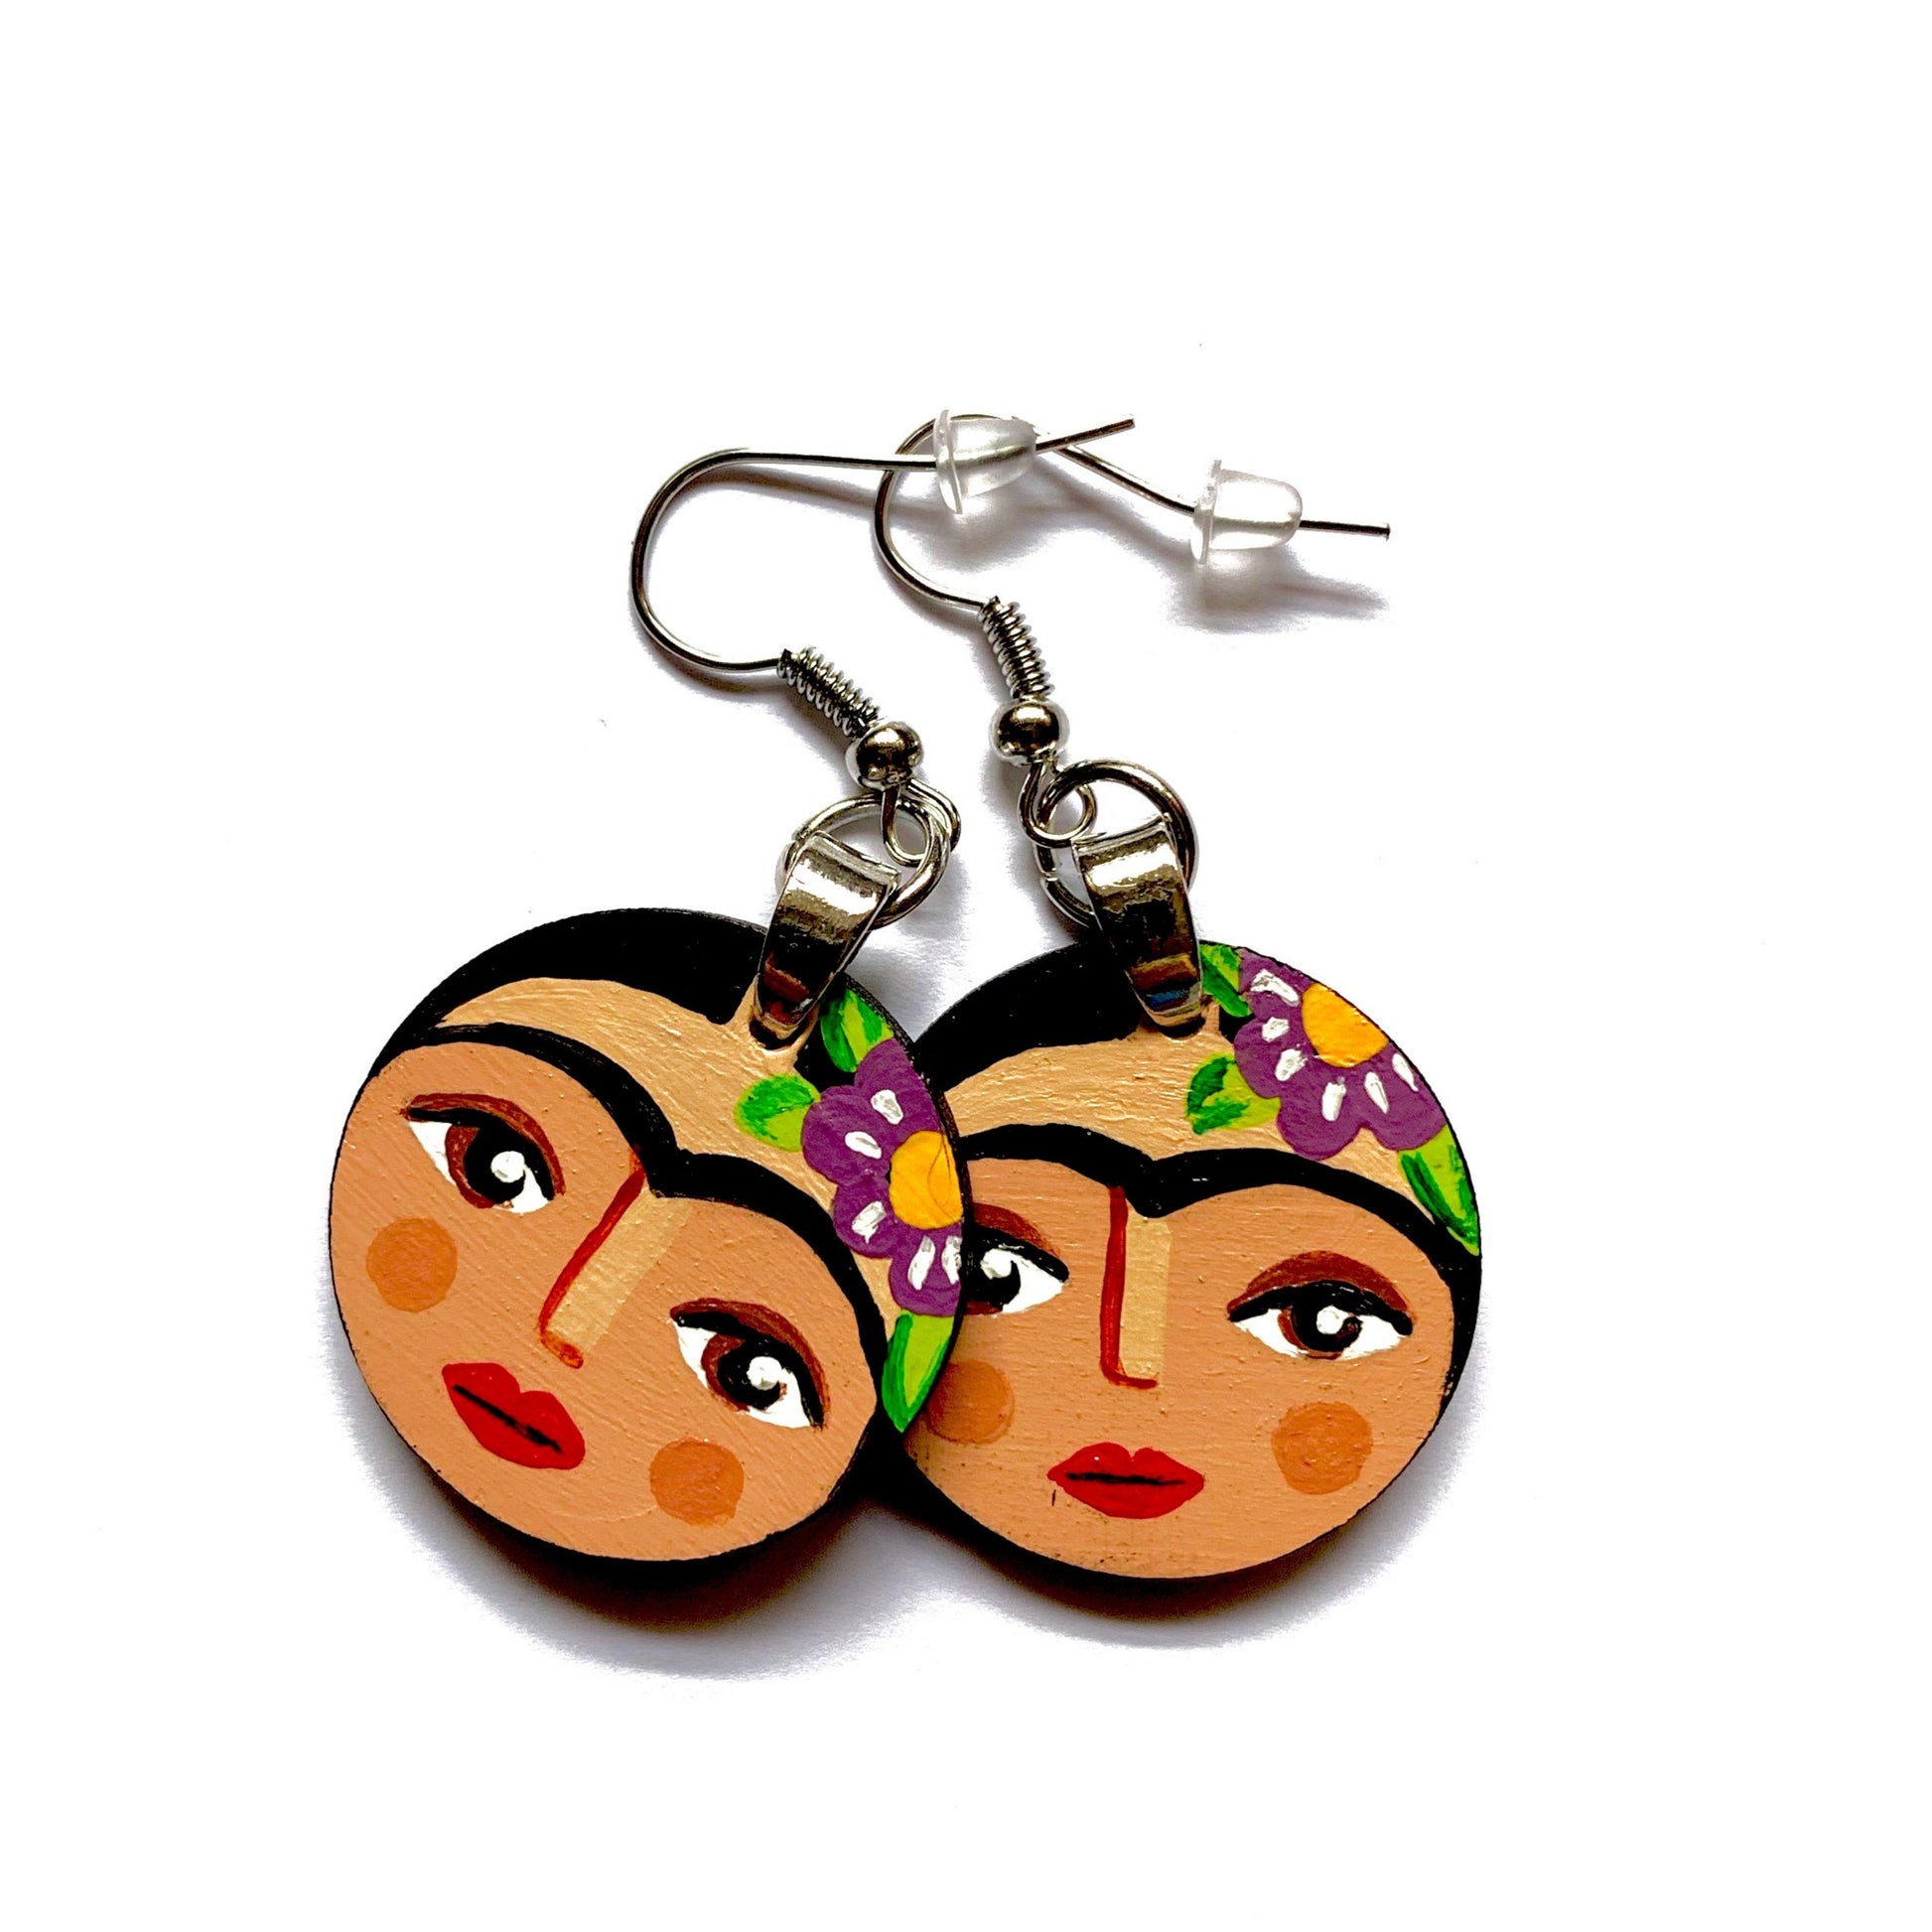 Frida Earrings. Frida Kahlo handmade and hand painted drop and dangle earrings. Round-Circle wood earrings. Mexican jewelry by Fridamaniacs. Mexico folk art